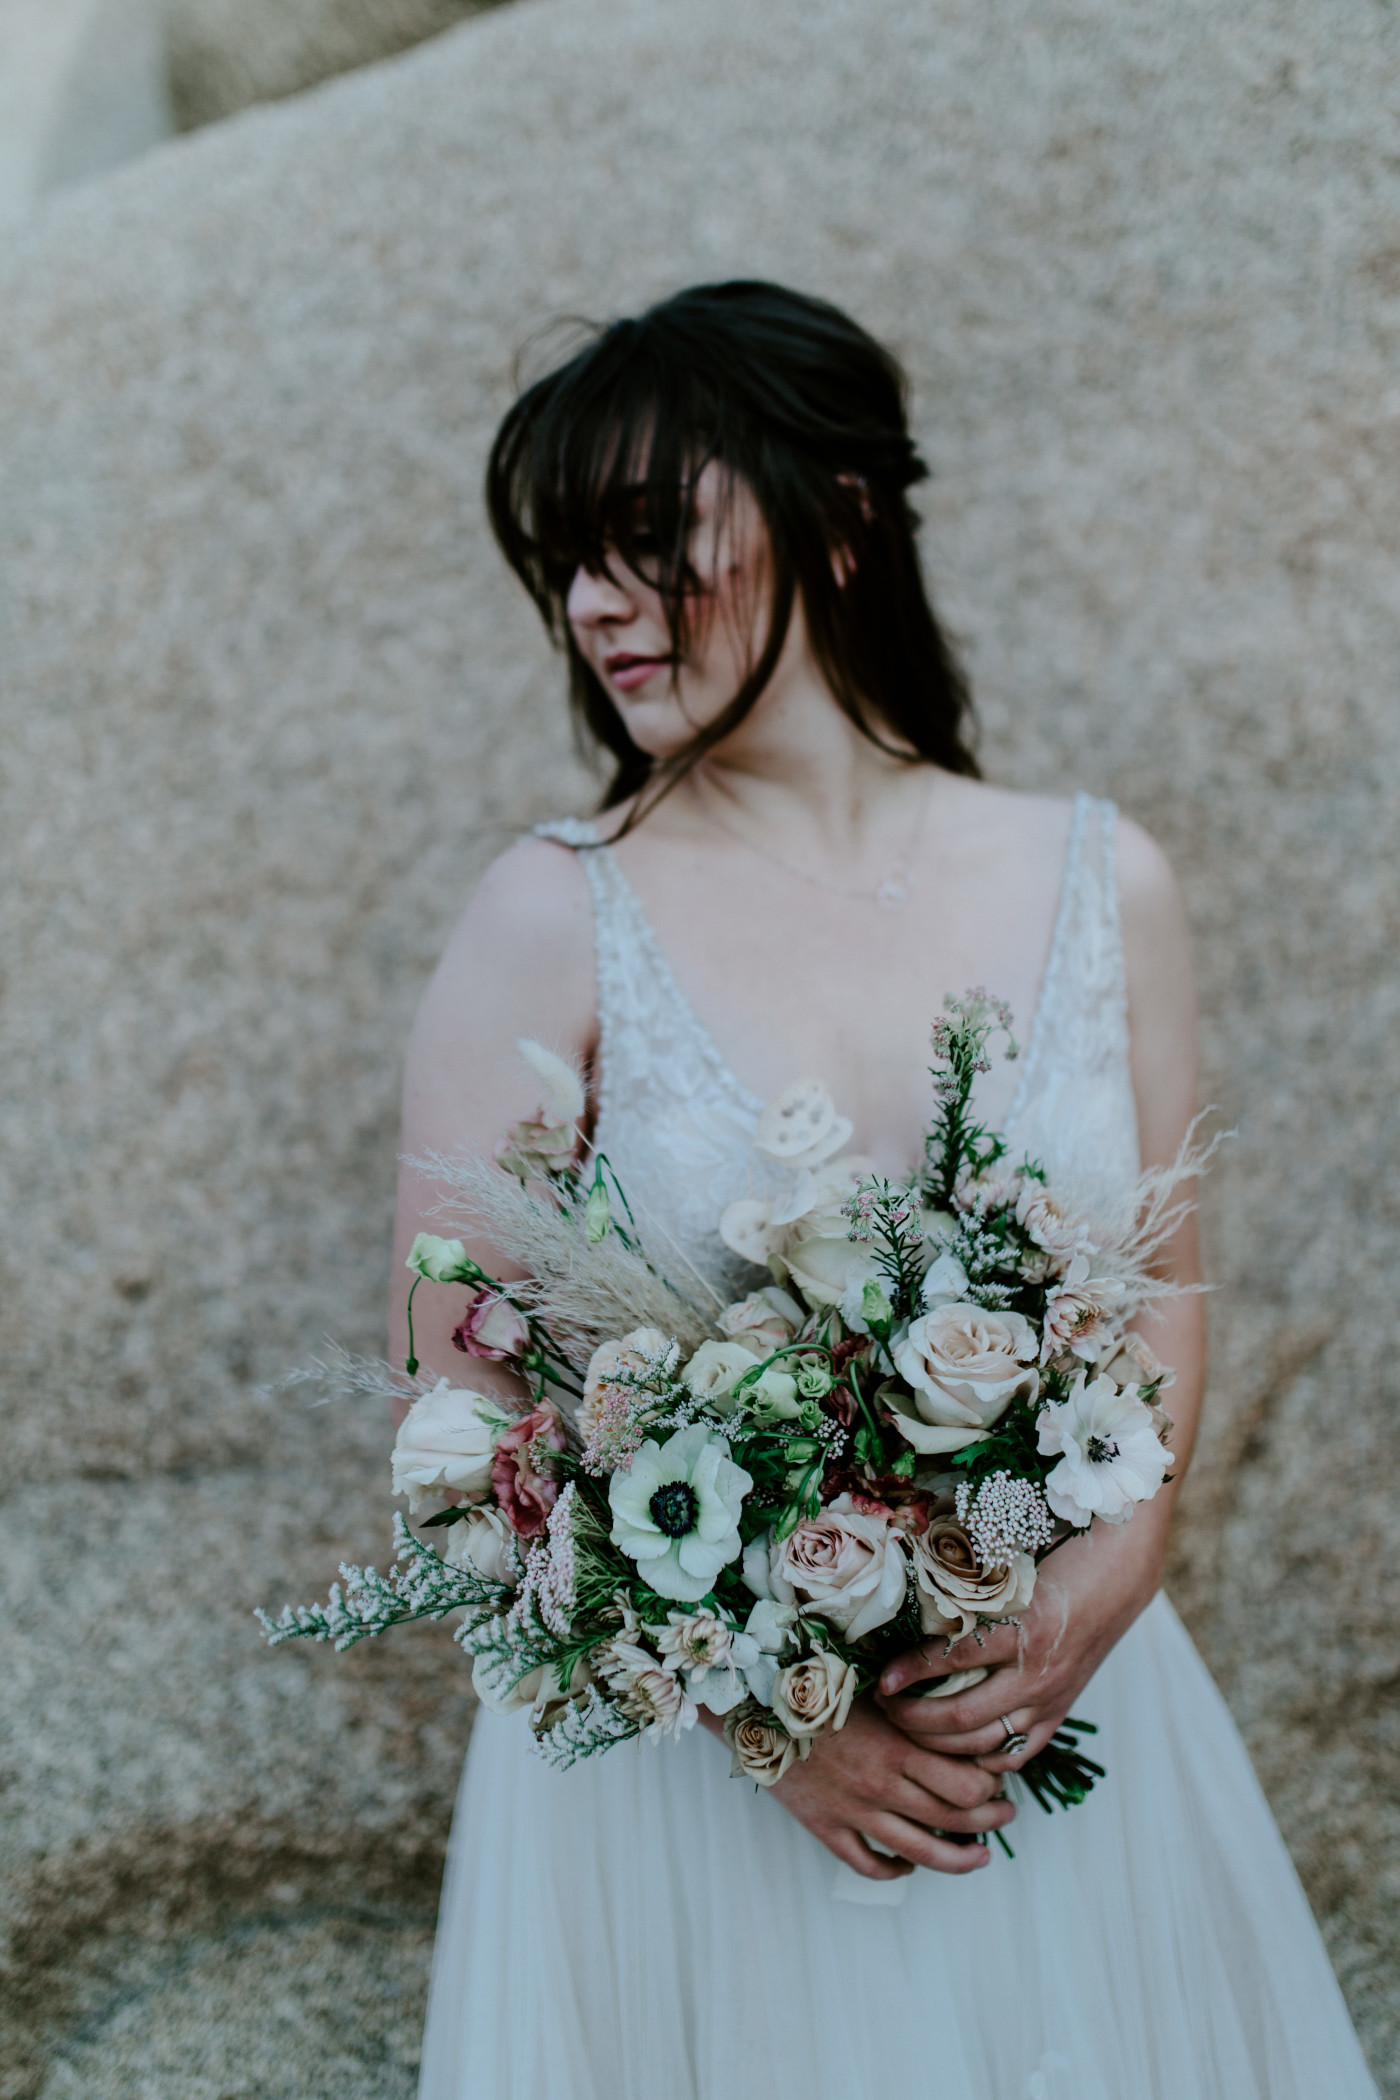 Shelby stands up against a rock in Joshua Tree with her flowers before the elopement ceremony.